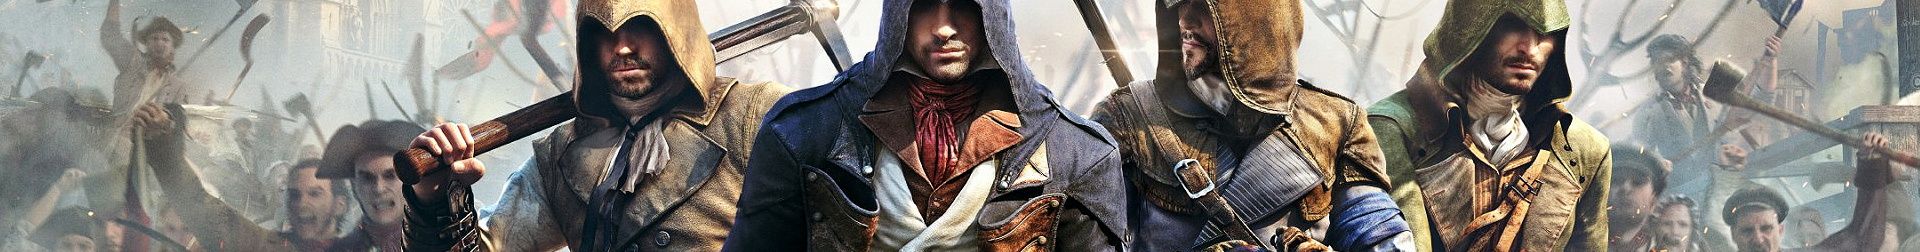 Assassin's Creed: Unity Banner